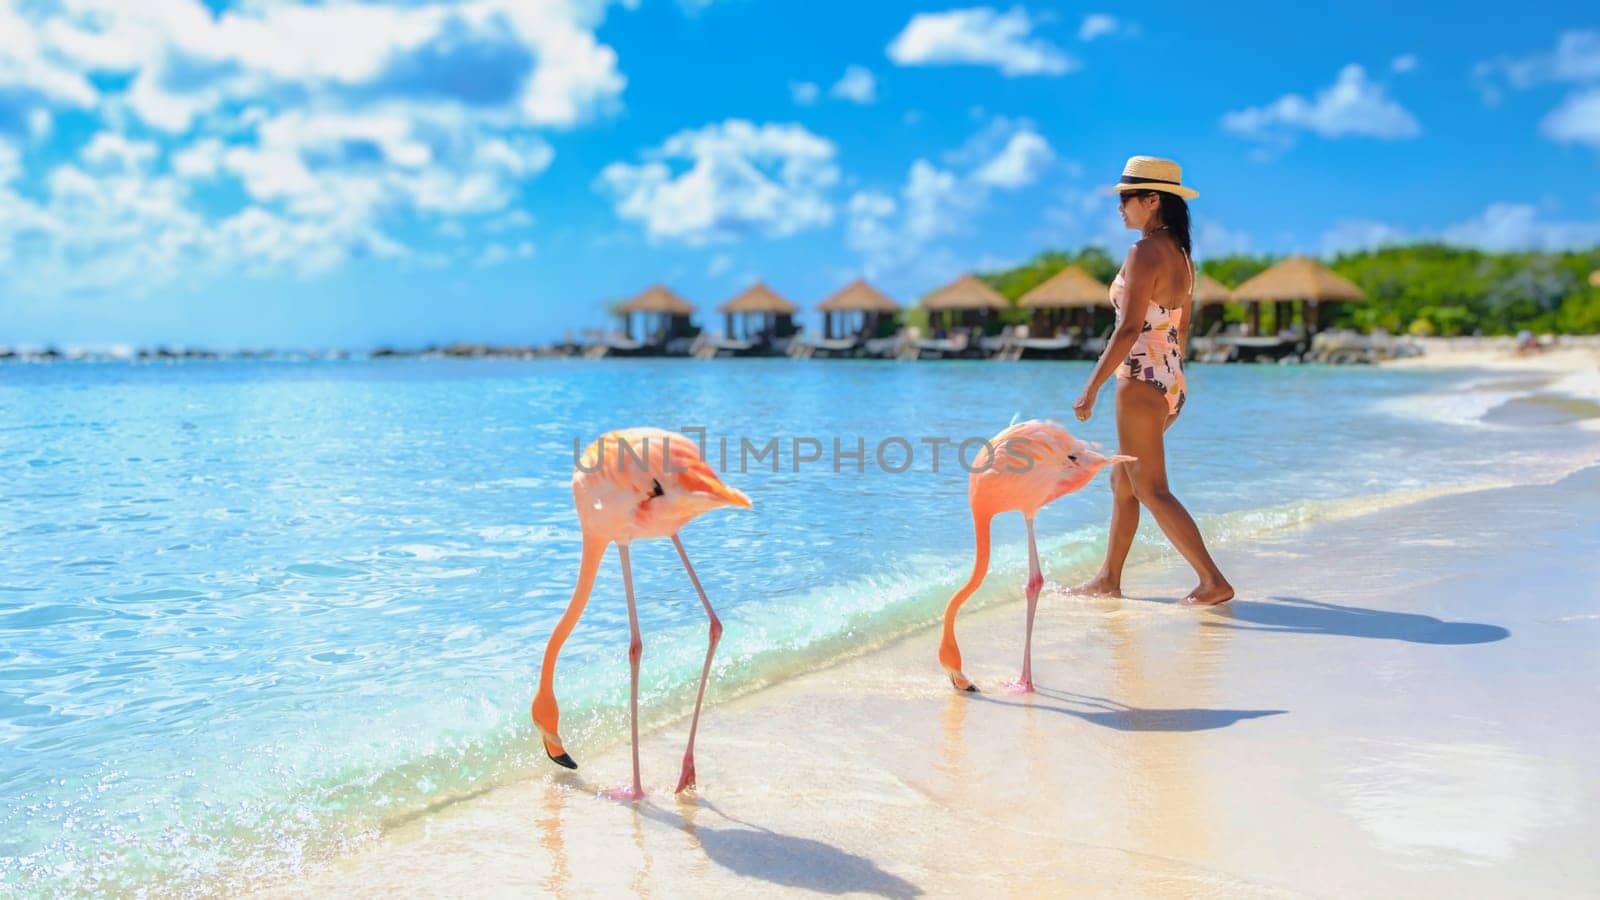 Asian women on the beach with pink flamingos at Aruba, flamingo at the beach in Aruba Island Caribbean. woman in a bikini relaxing on the beach during vacation